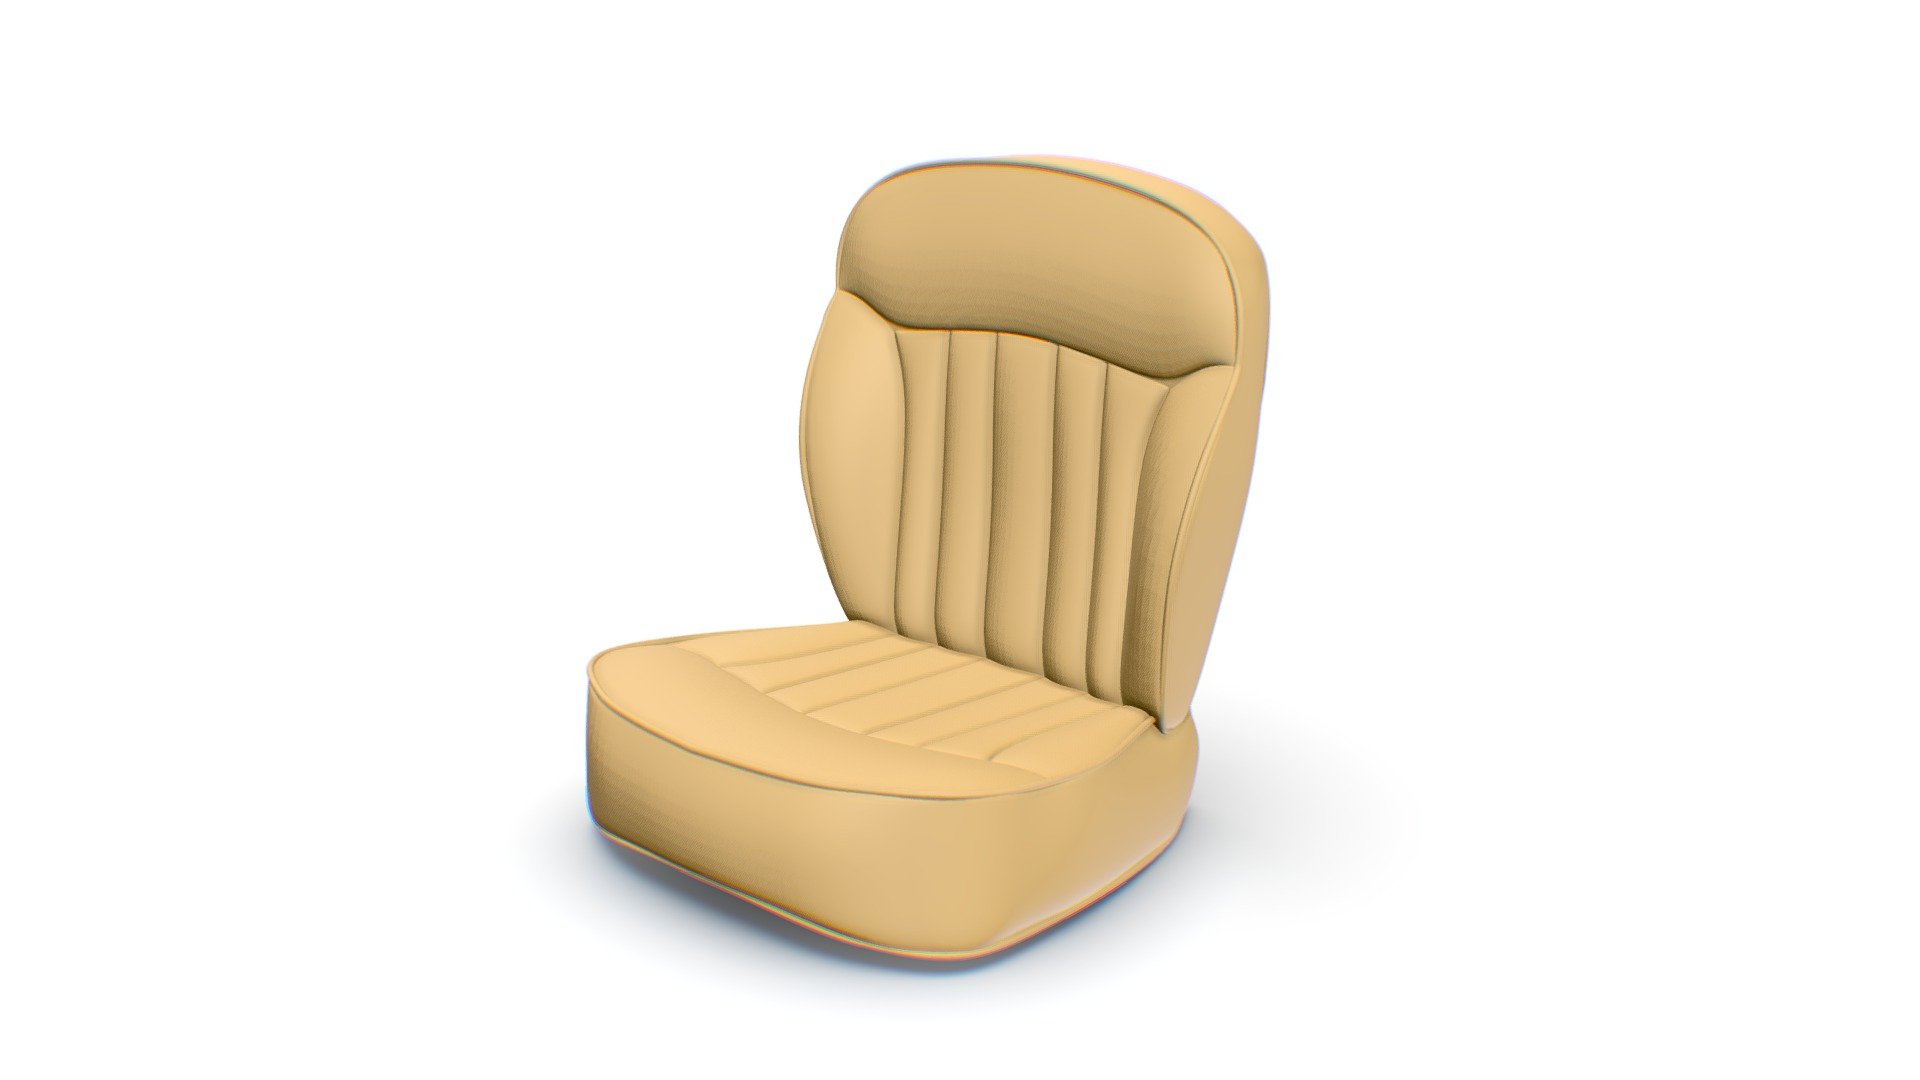 Vintage Classic Car Seat 3D model




A model of Blender 3.2

EEVEE Render Engine used.

Also, use with Cycles Render engine

All leather PBR Material

Easy to edit and use

Can Fit most Old vehicles and concept vehicle models

Just Buy and use - Vintage Car Seat - 3D model by Chakra (@Chakra_s) 3d model